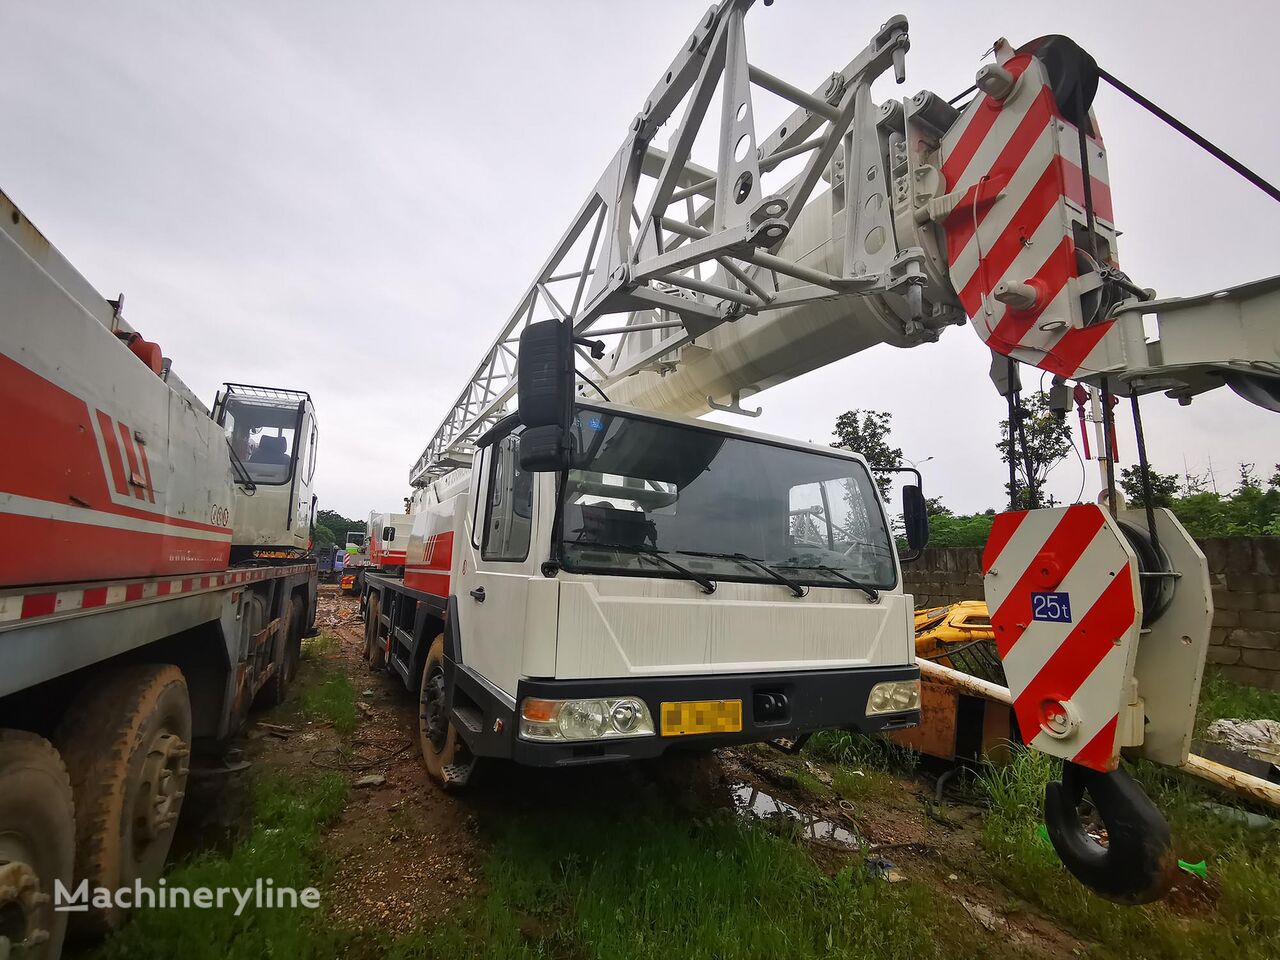 Zoomlion 25T 4-section QY25Y mobile crane